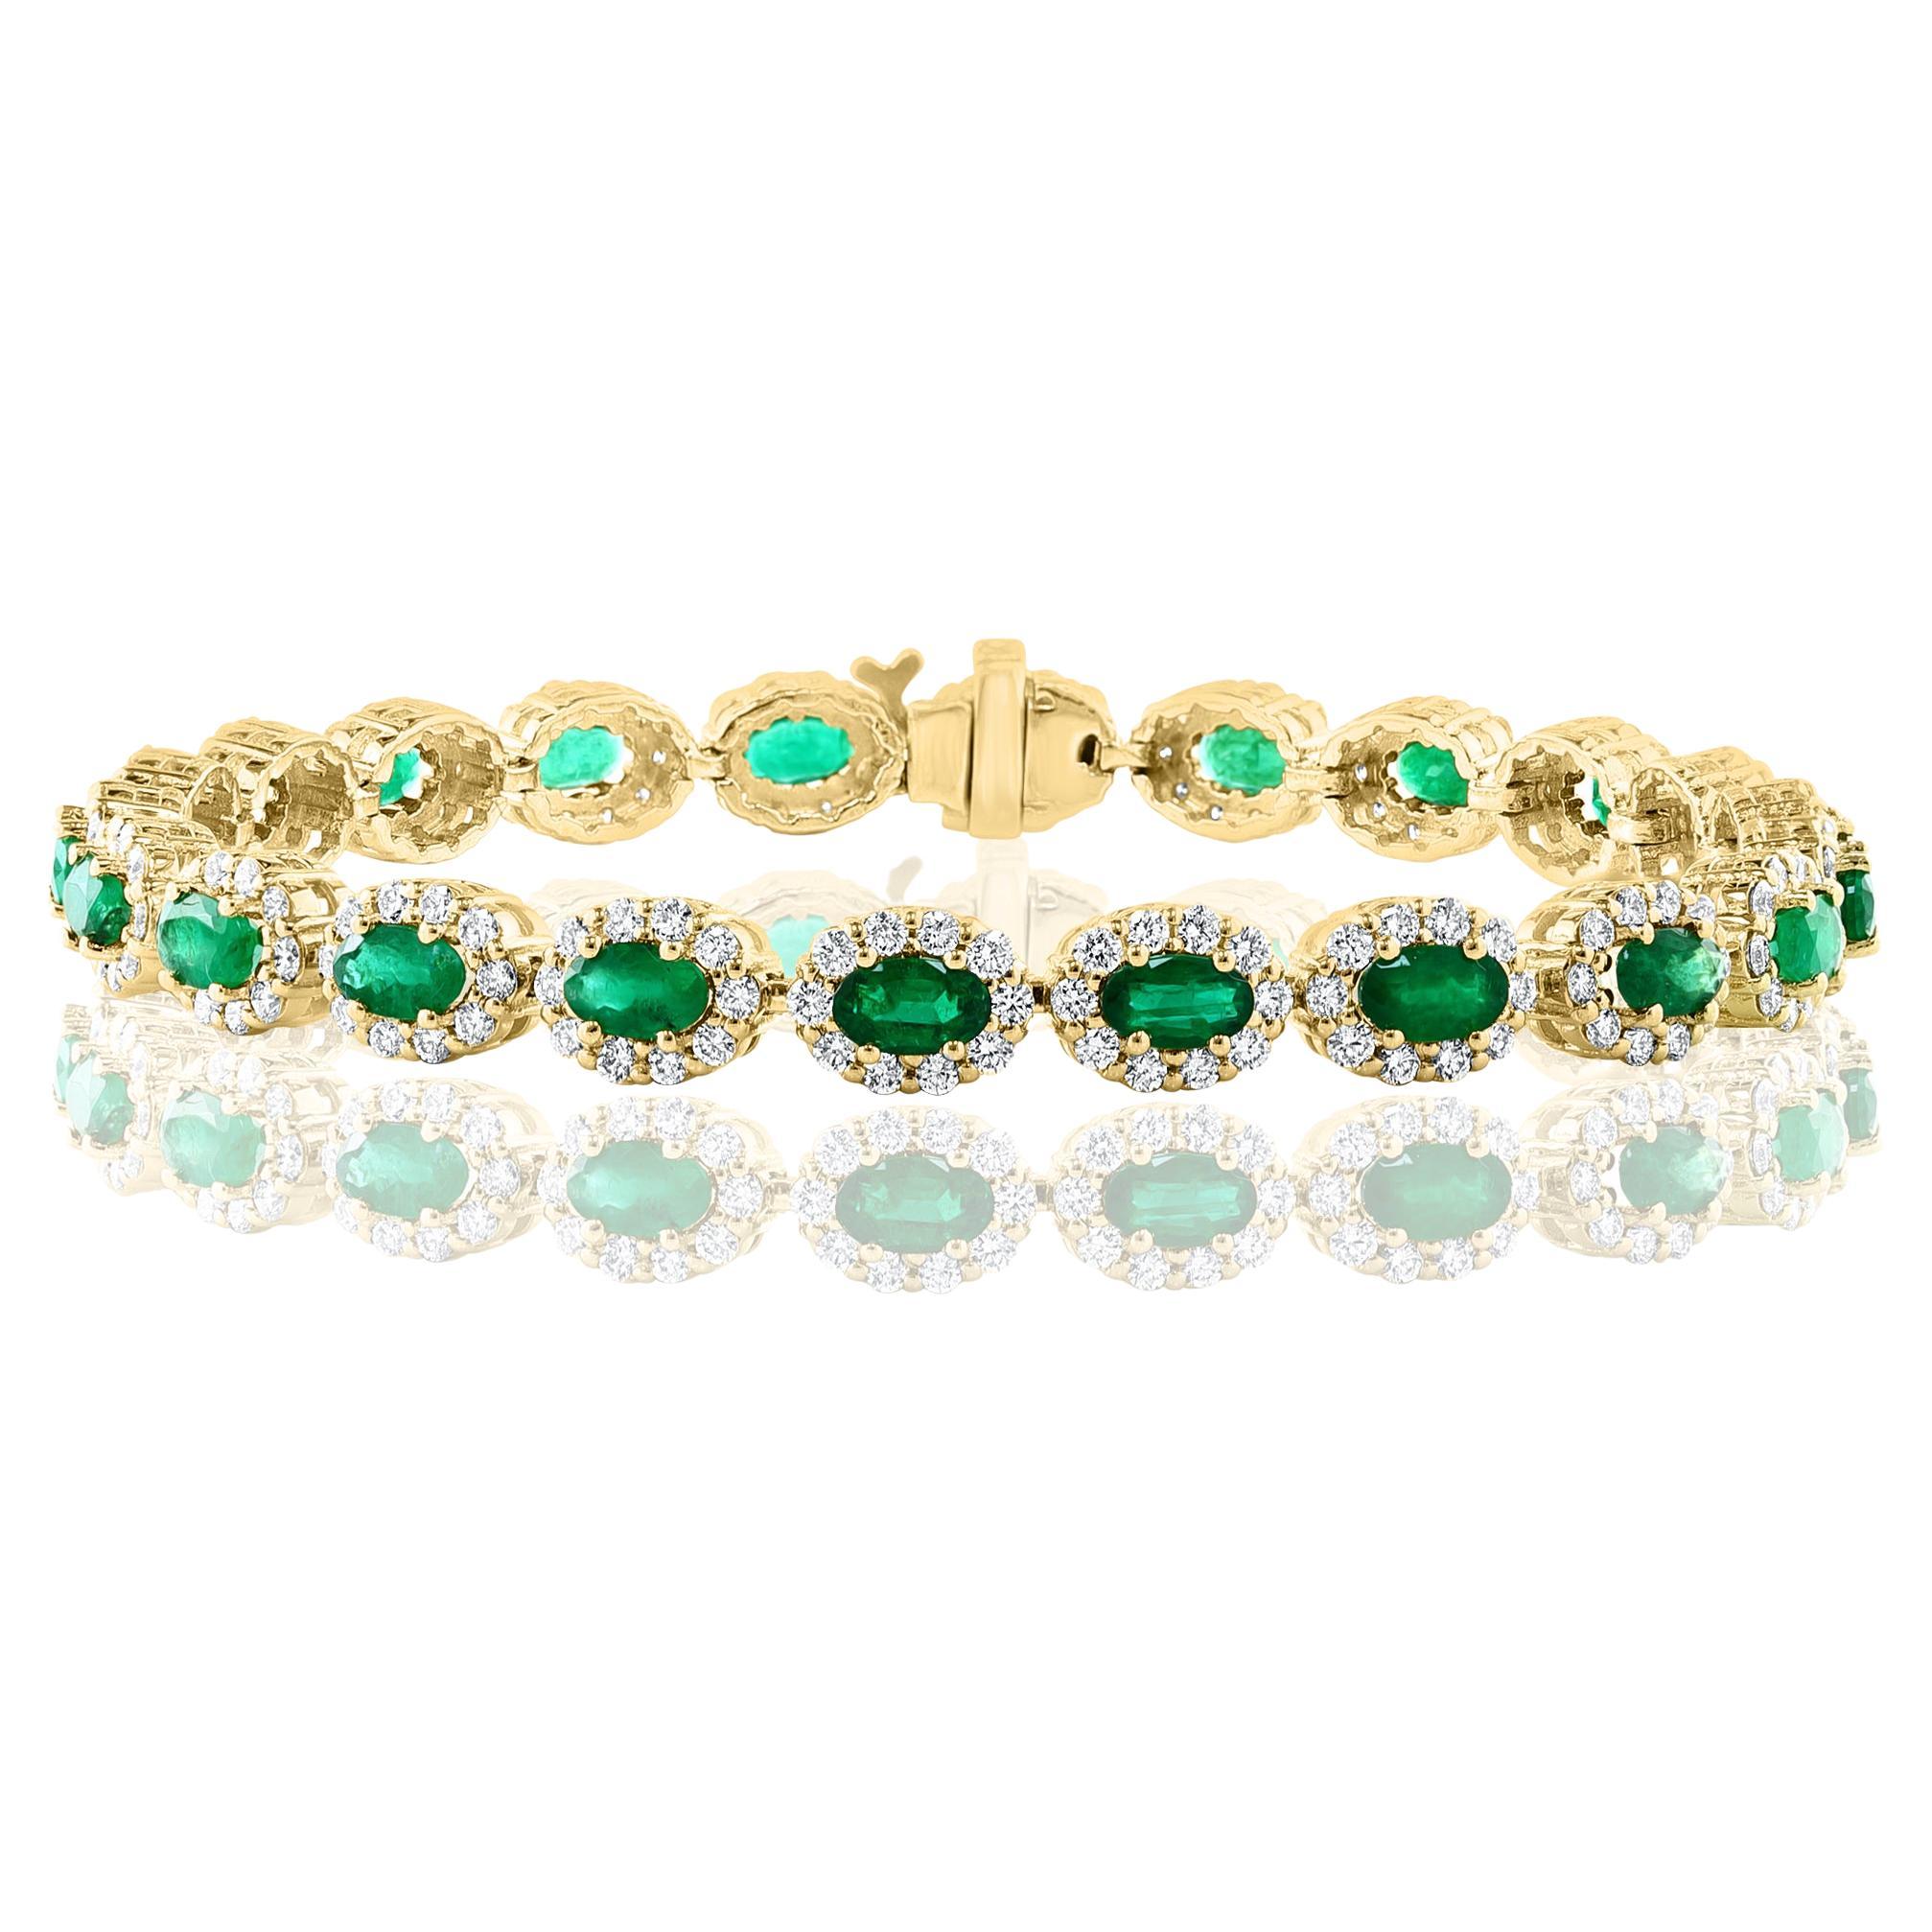 4.69 Carat Oval Cut Emerald and Diamond Halo Bracelet in 14K Yellow Gold